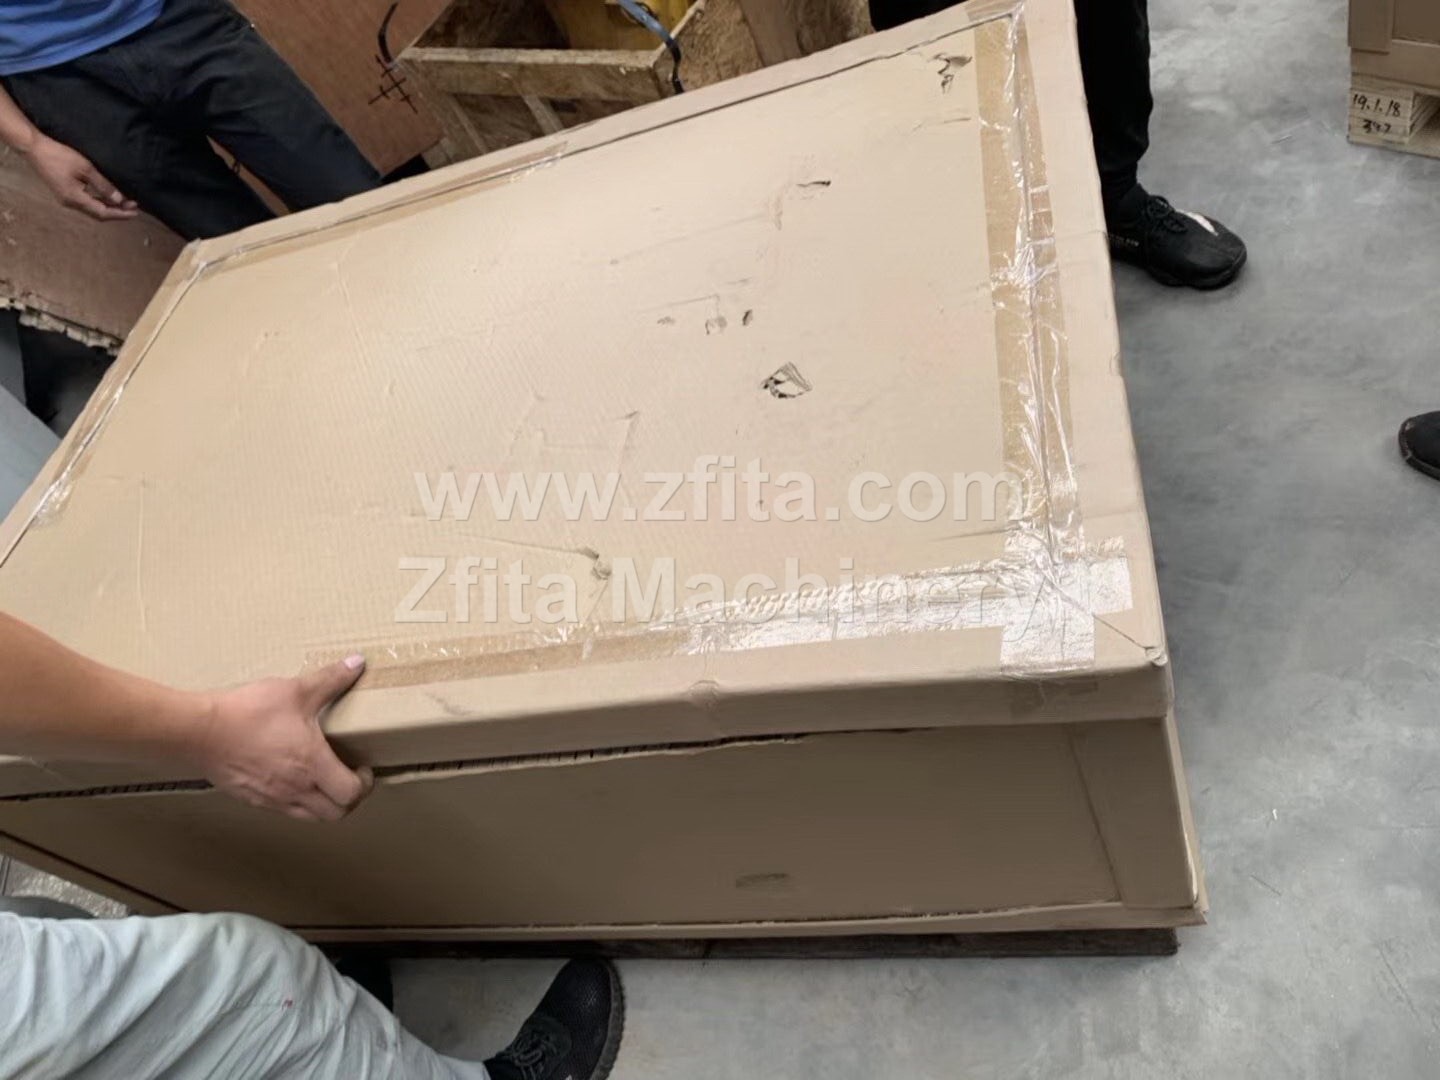 ZF parts ready for shipping(图2)